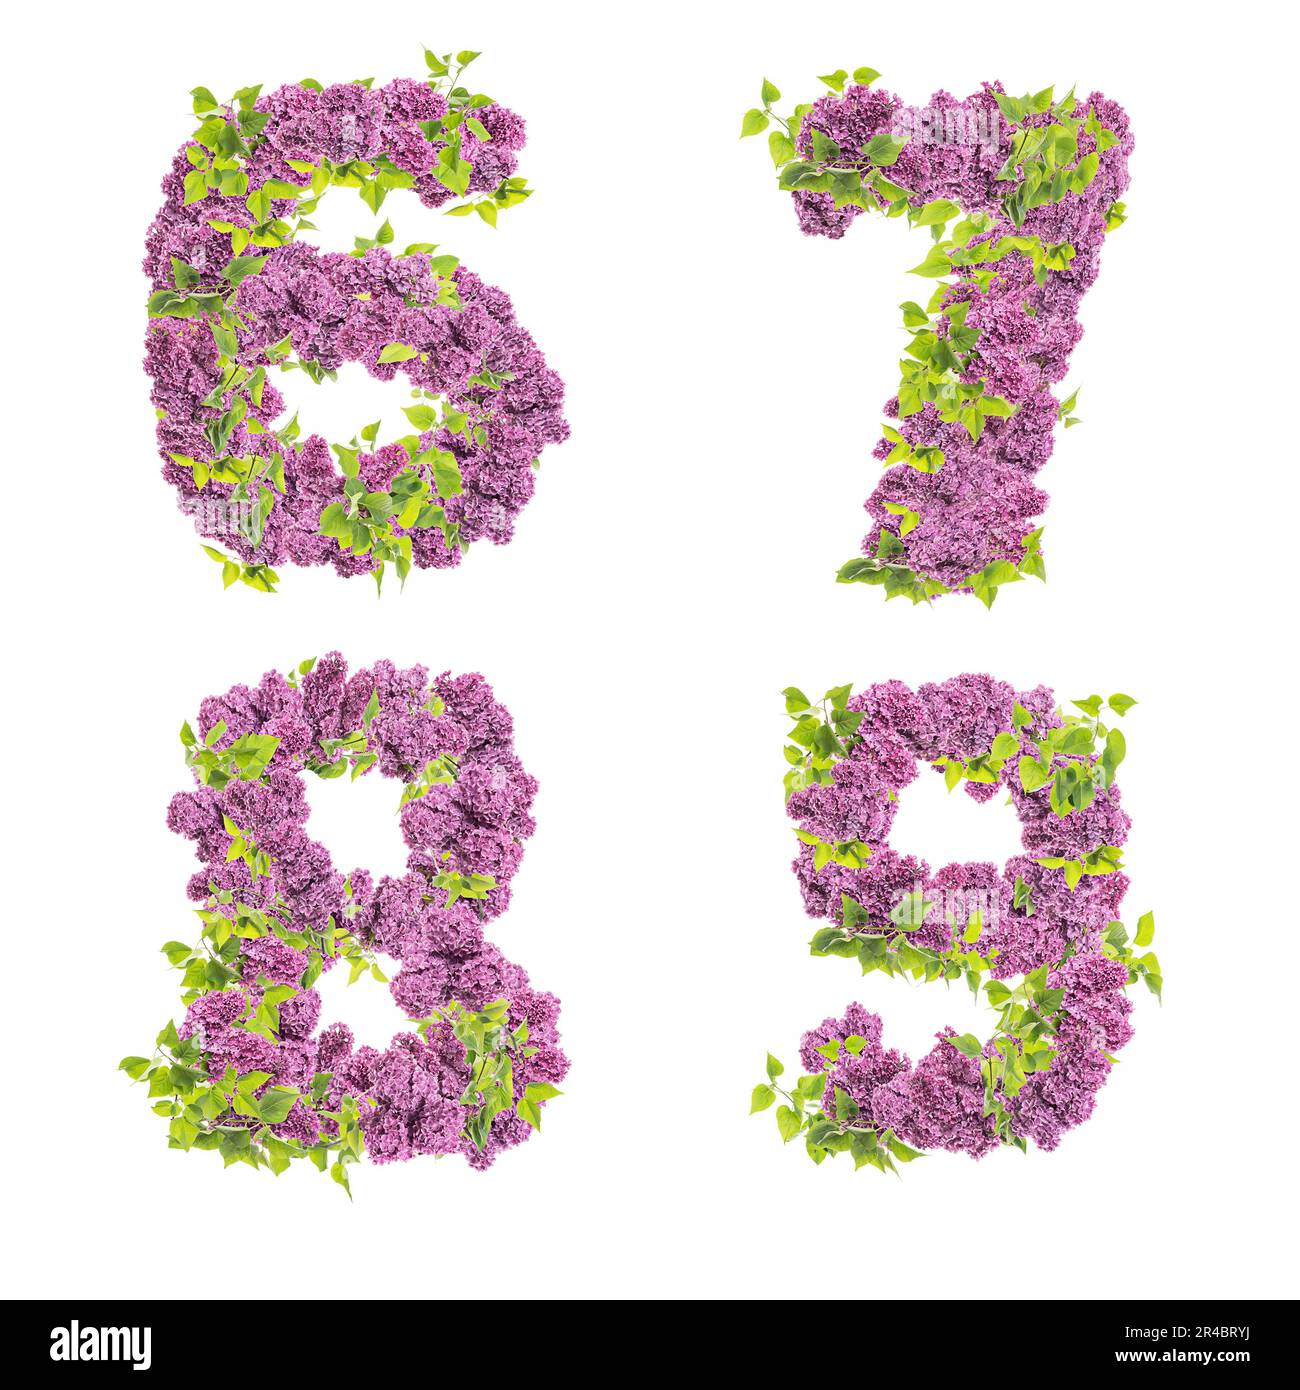 3D rendering of Lilac flowers capital letters alphabet - digits 3-5 Stock Photo